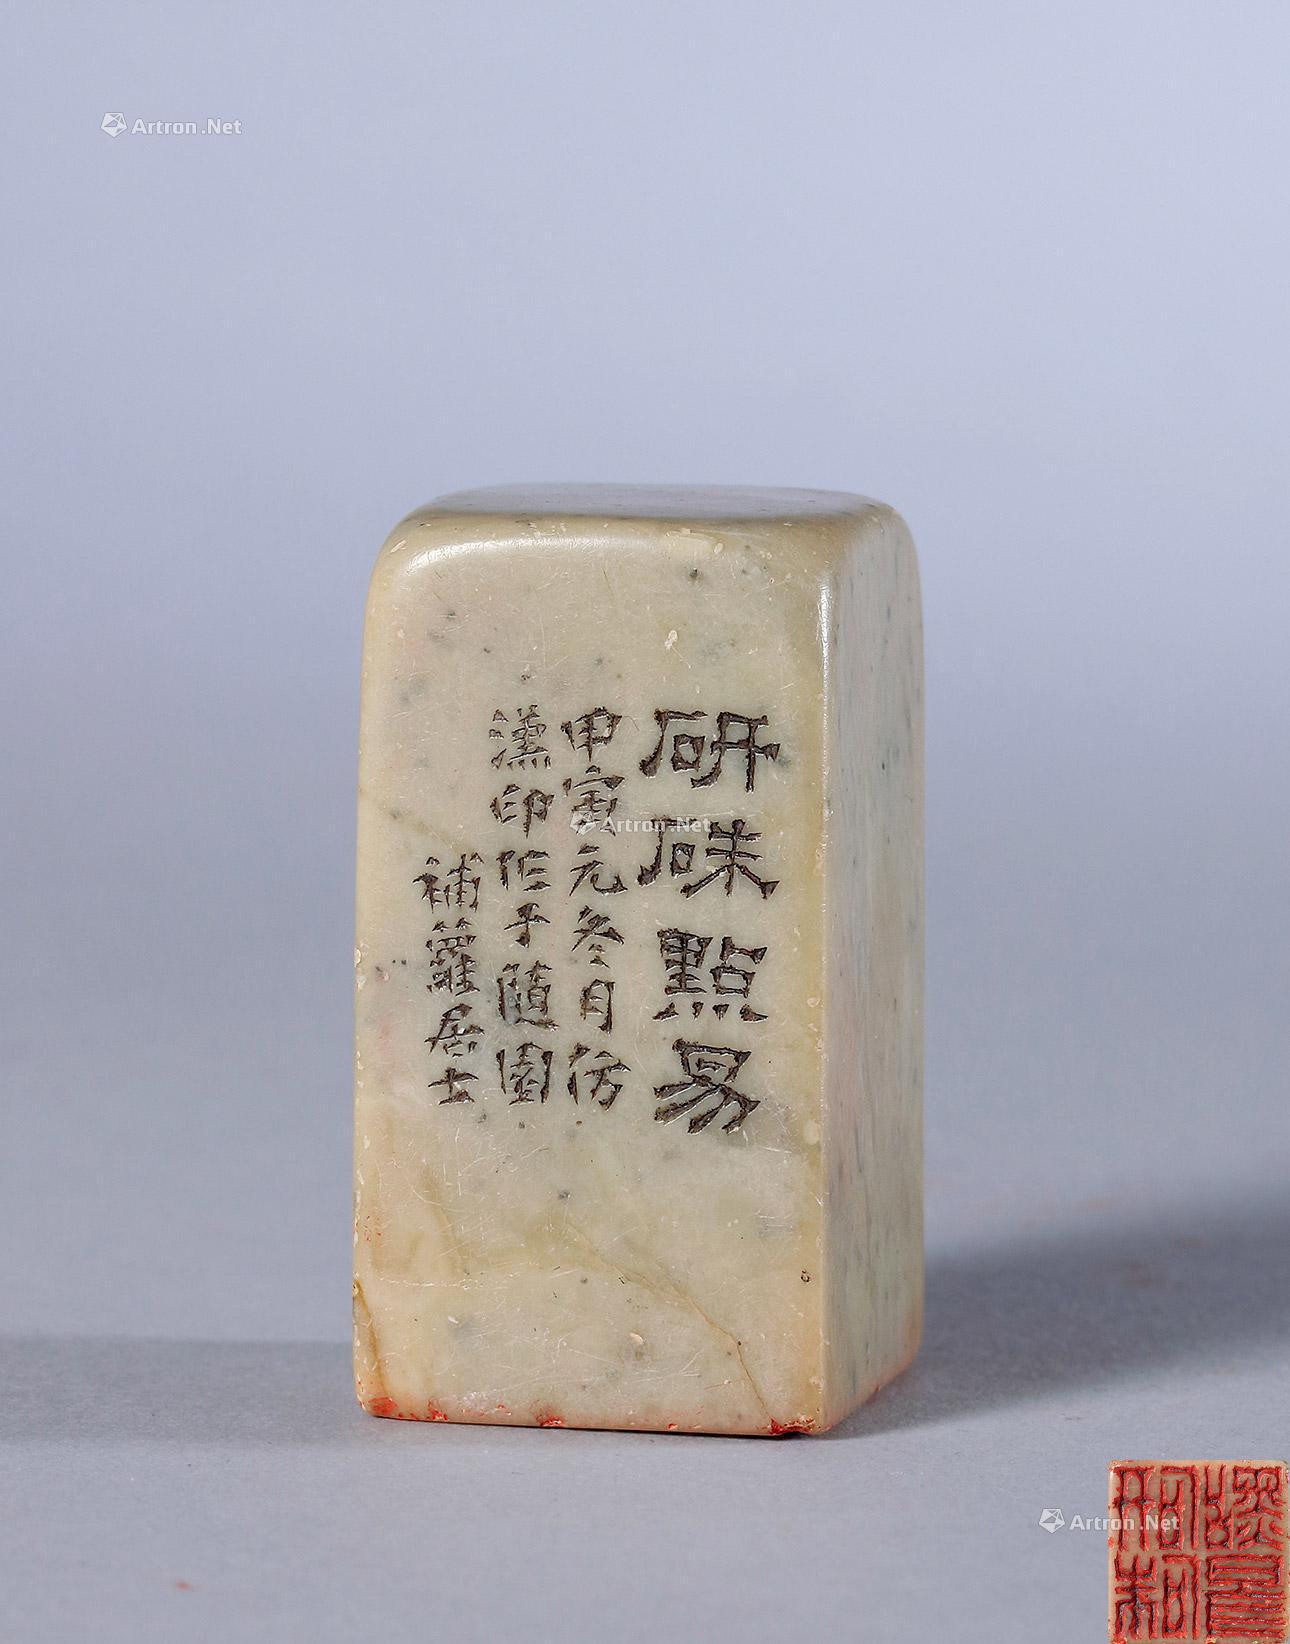 SOAPSTONE CARVED SQUARE SEAL WITH CHINESE CHARACTER ‘YANZHU DIANYI‘